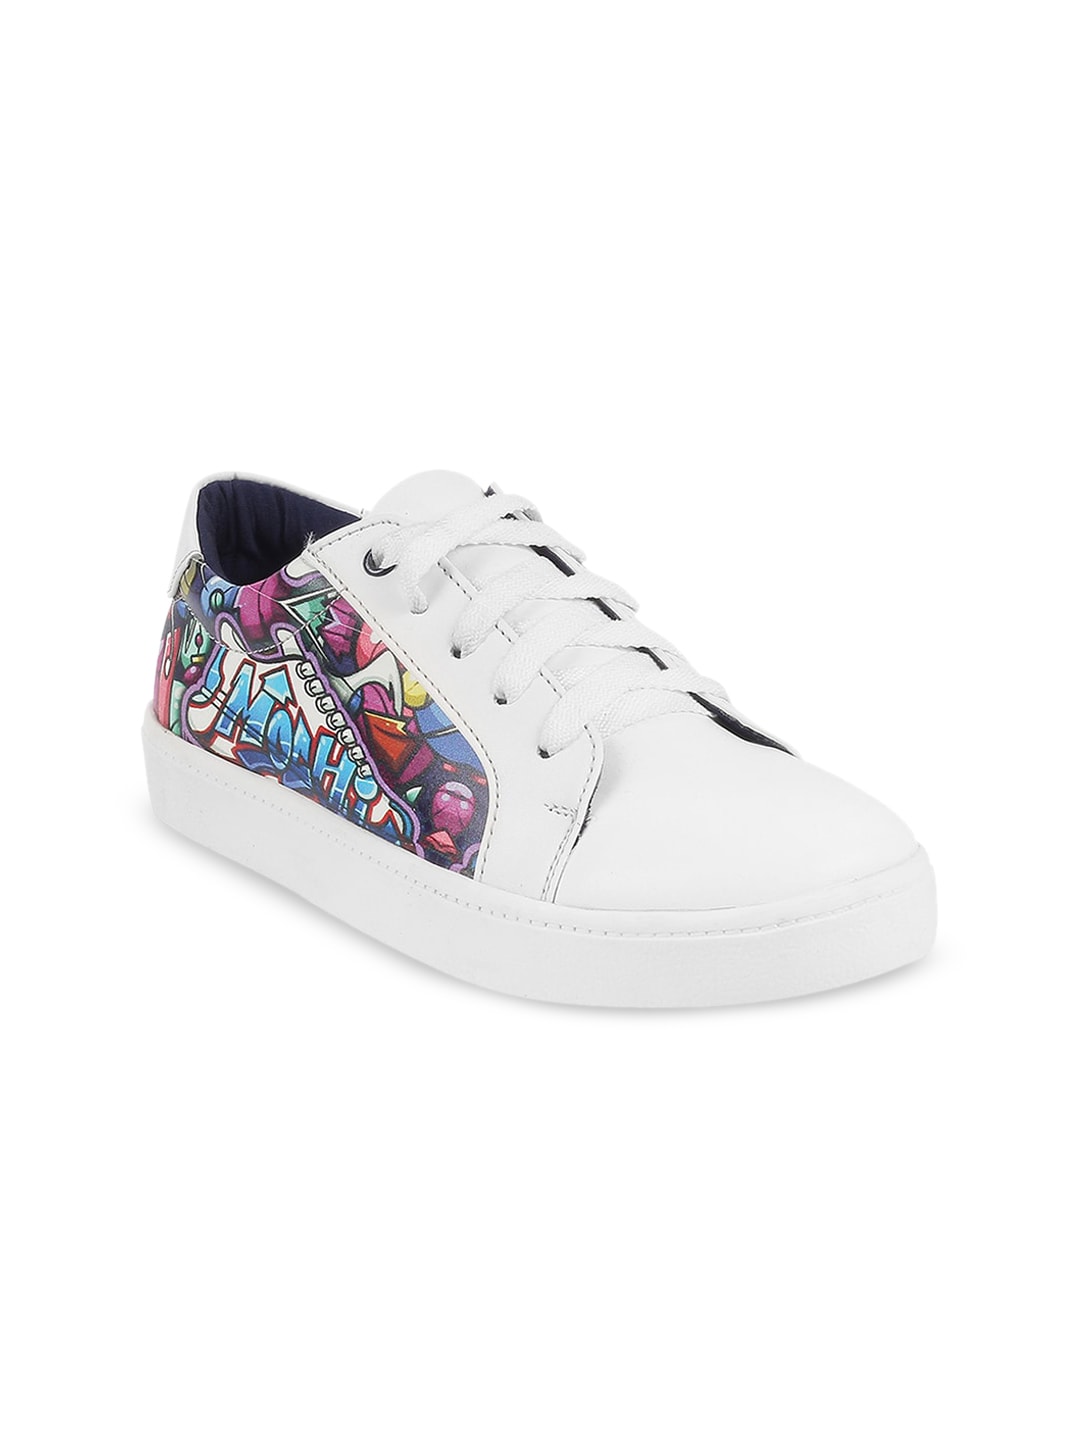 Mochi Women White Printed Sneakers Price in India